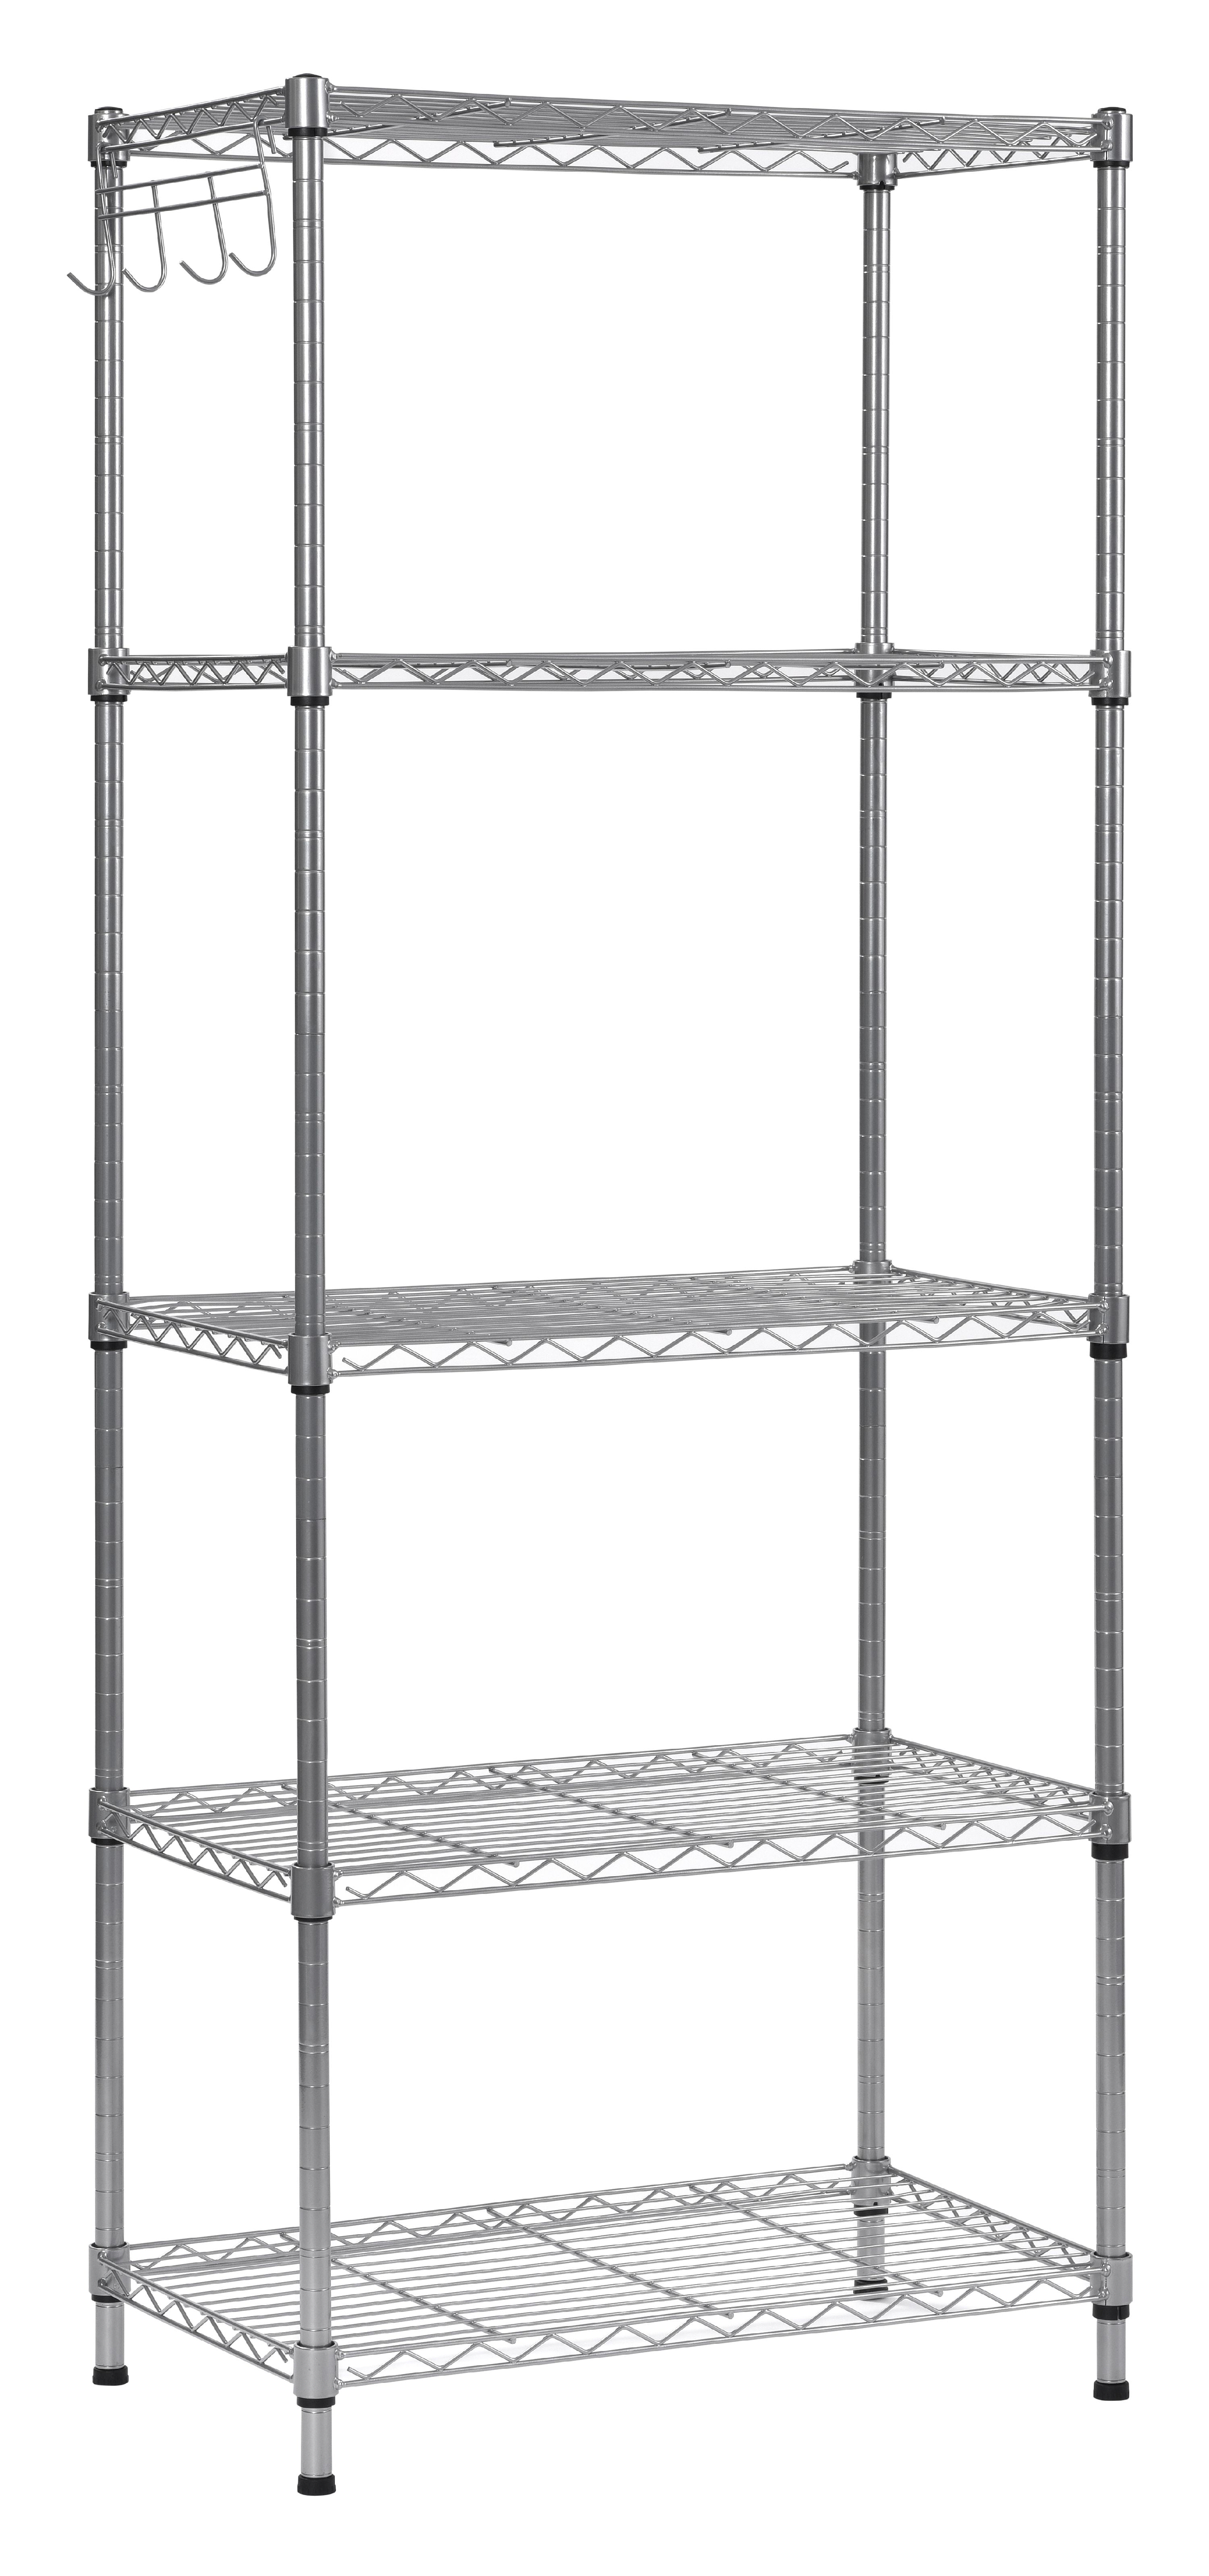 Muscle Rack 5 Tier Wire Shelving Unit, Adjustable Wire Metal Shelving Rack